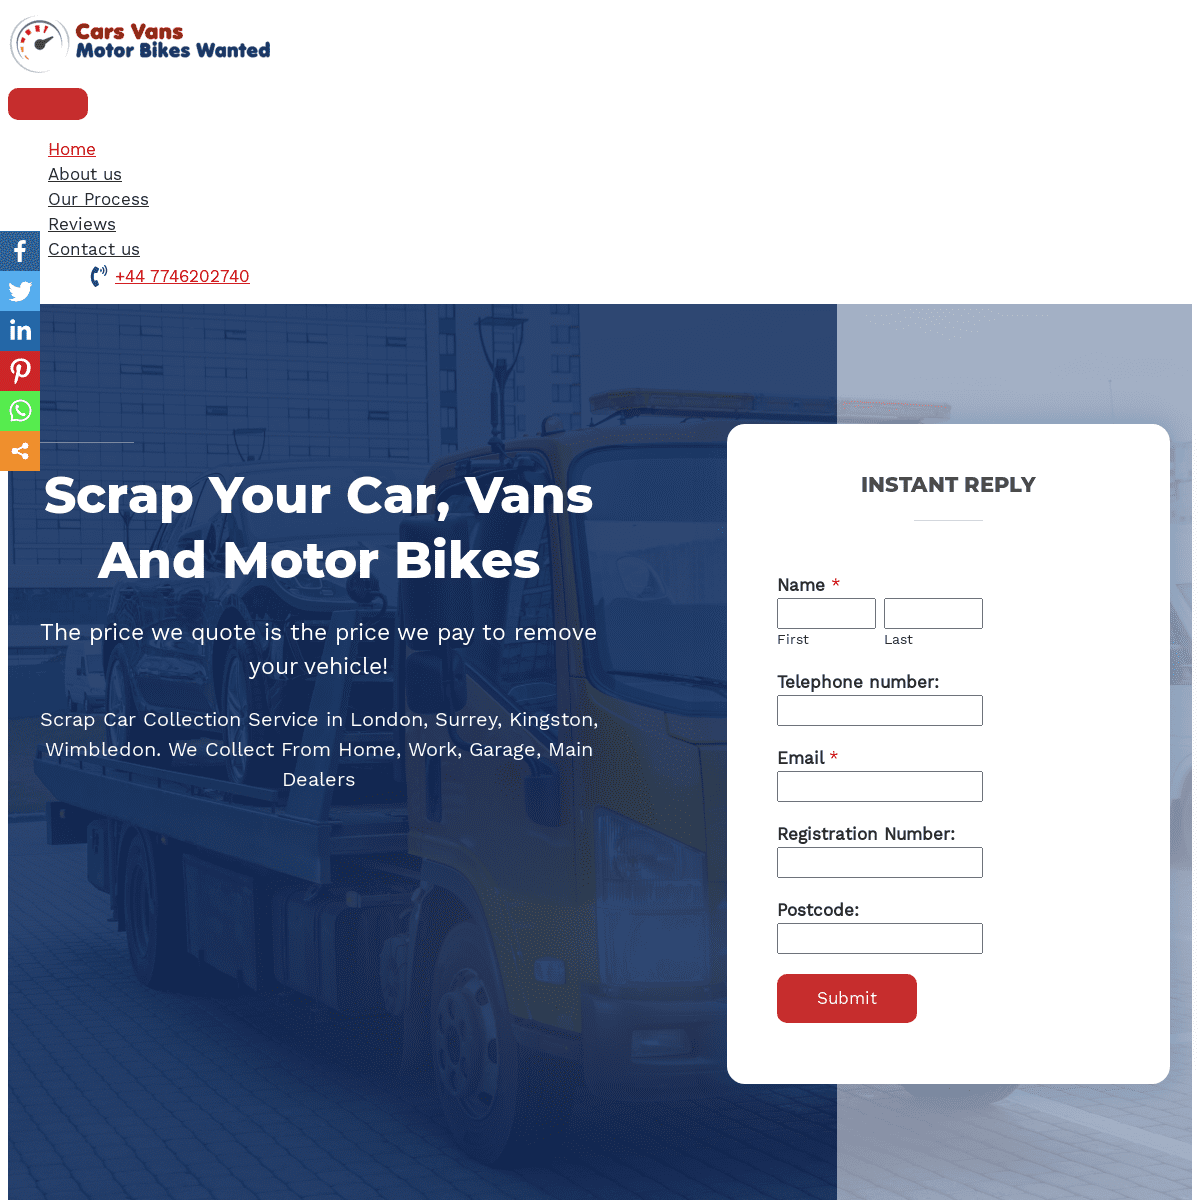 A complete backup of https://carsvansbikeswanted.co.uk